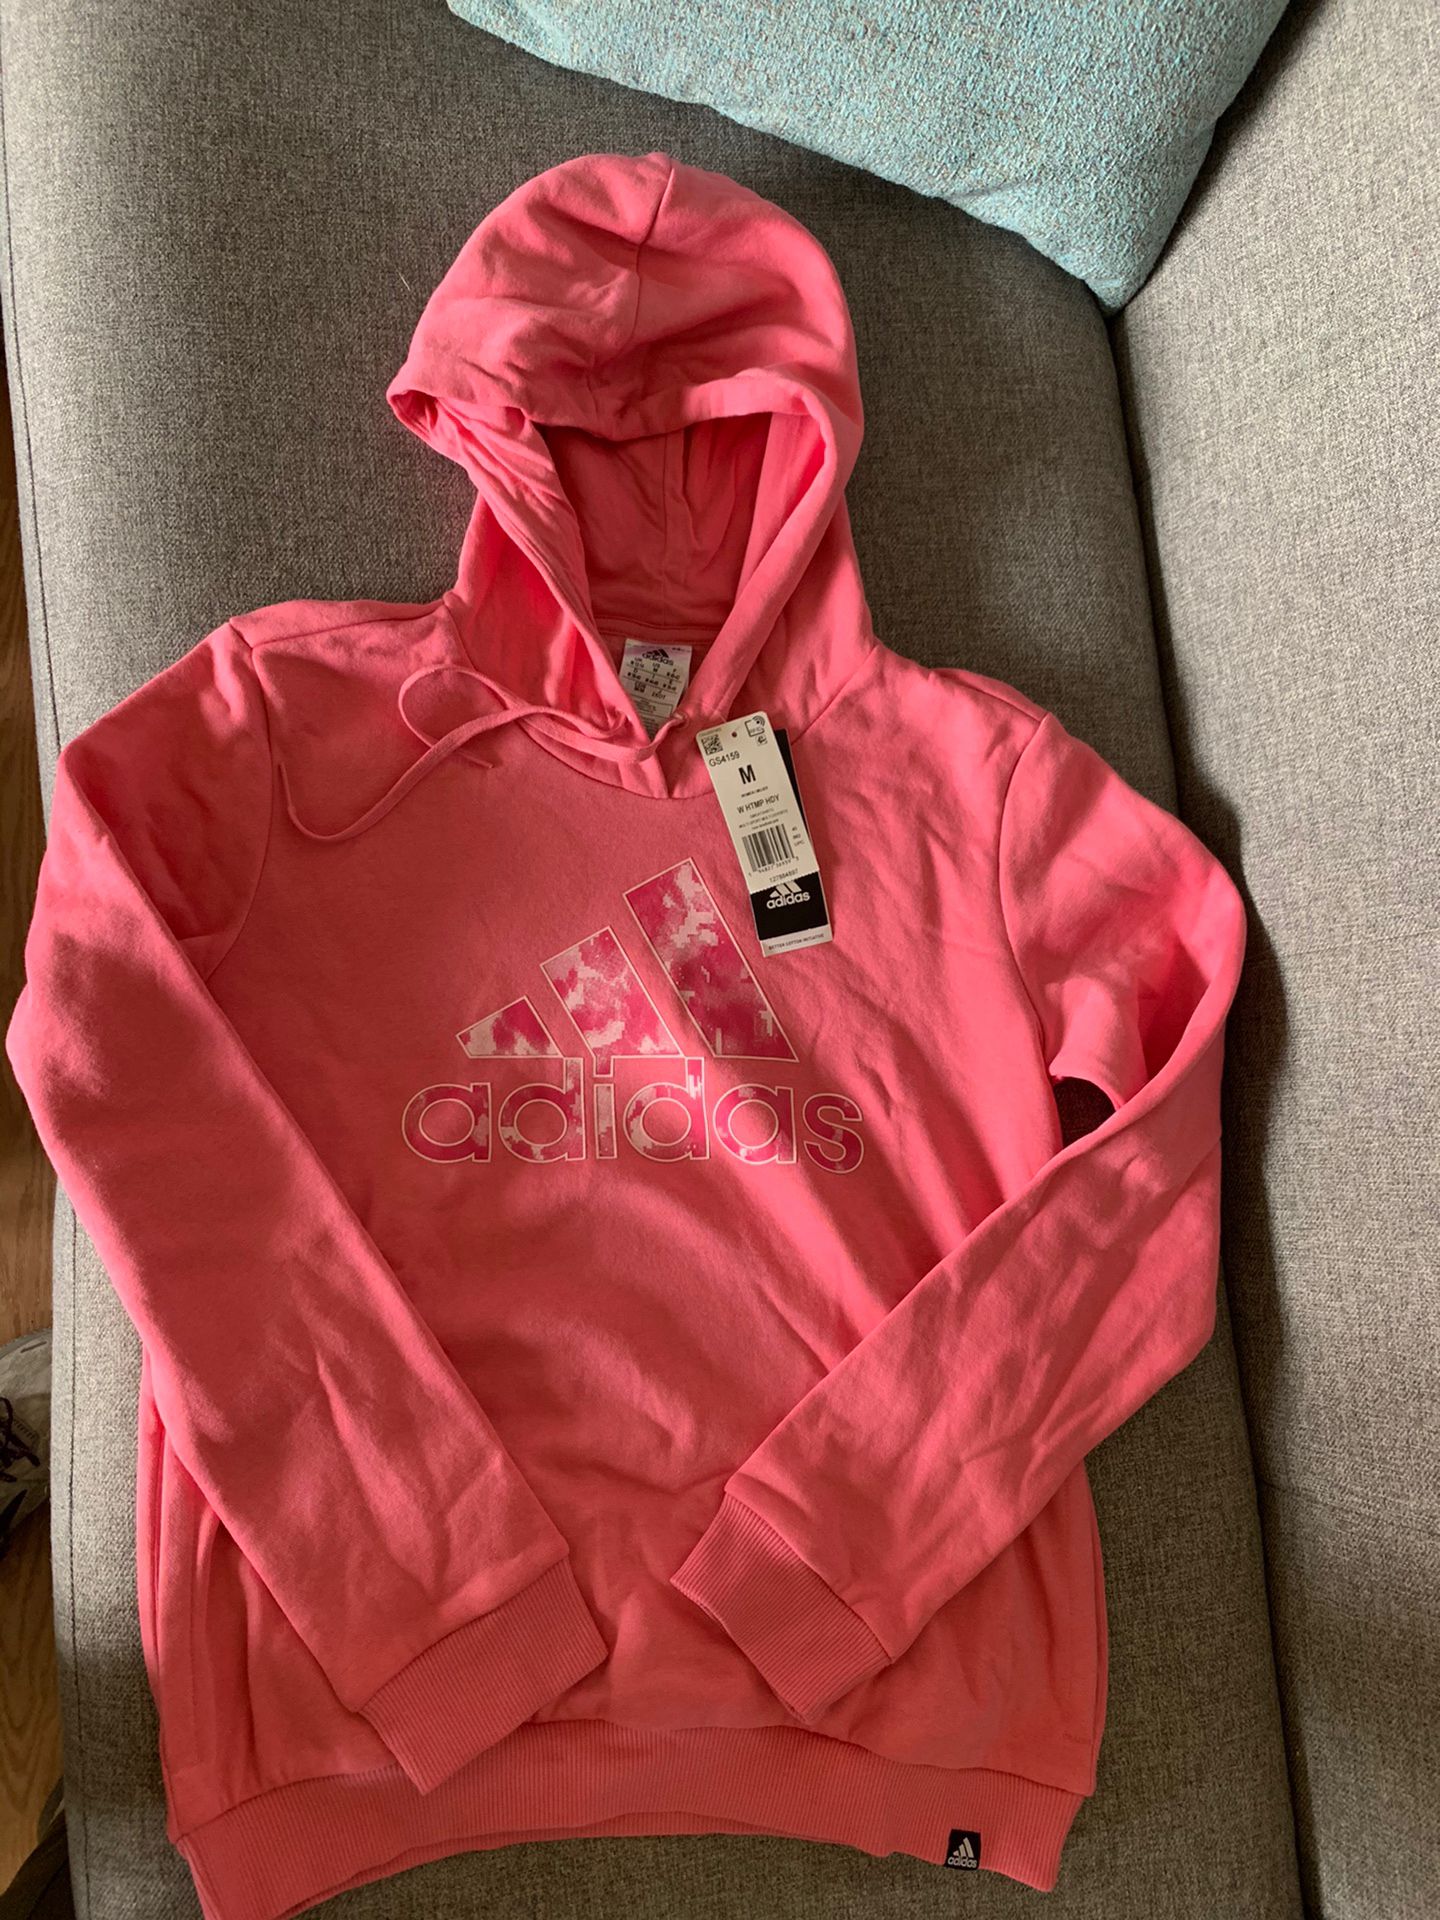 Noroeste calidad Cha Adidas Hoodie sweatshirt, Rose pink, New, Size M for Sale in Carol Stream,  IL - OfferUp